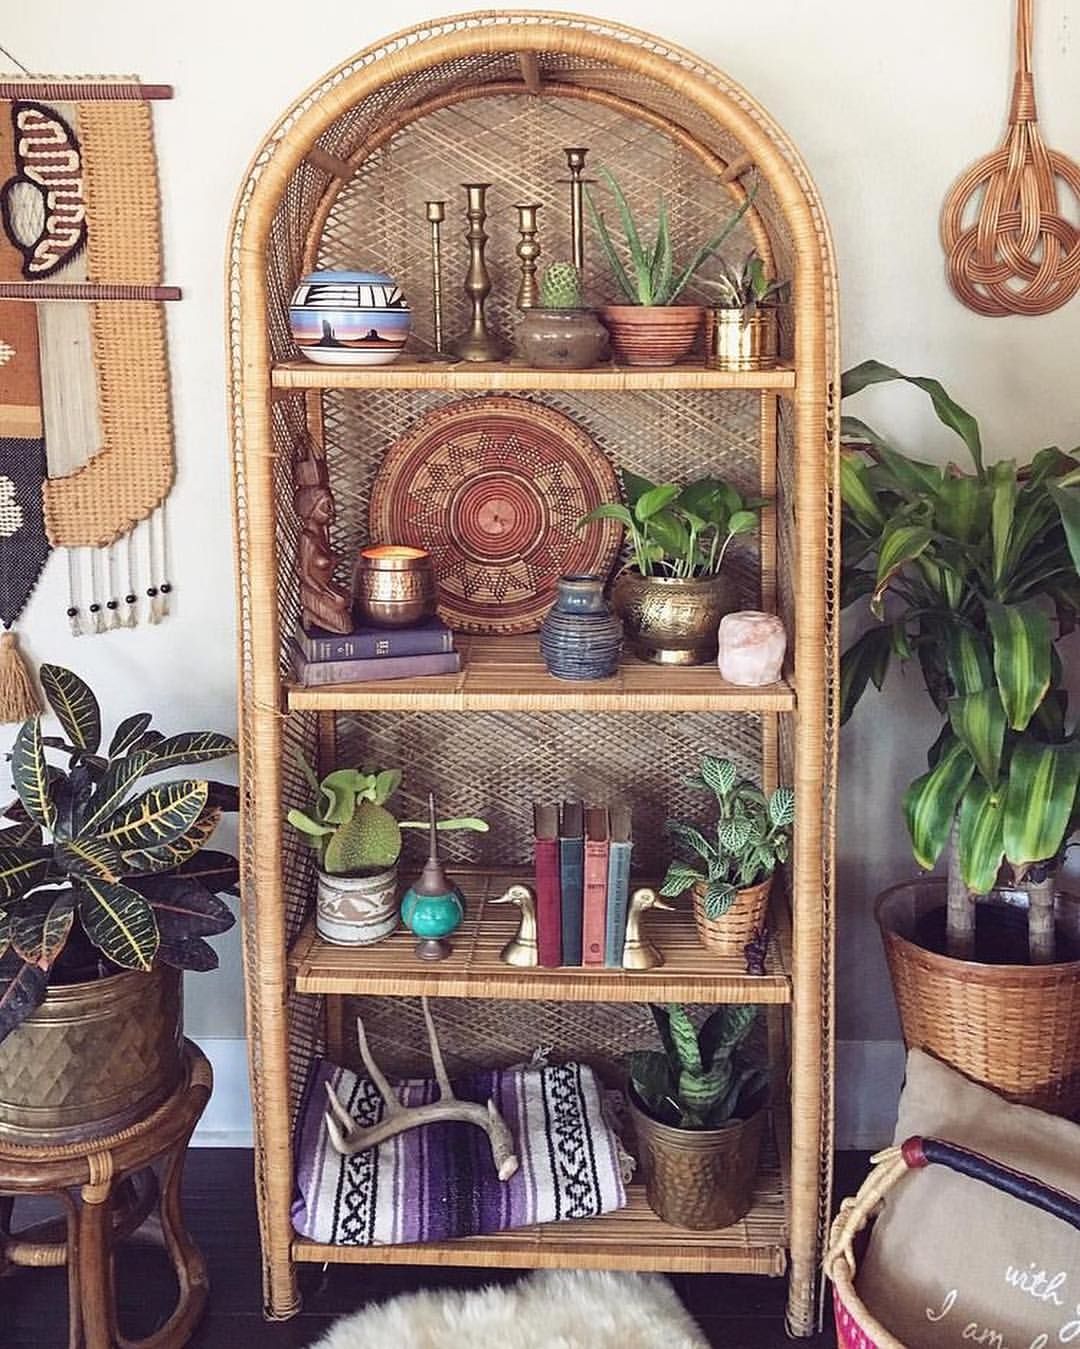 ⋒𝐫 𝐨 𝐮 𝐠 𝐡  𝐱  𝐭 𝐮 𝐦 𝐛 𝐥 𝐞 𝐝⋒ on Instagram: “every bohemian style home needs a good wicker shelf 🙌🏼 We have one 6ft tall wicker shelf available for pick up only in OC, CA. It fits SO…”